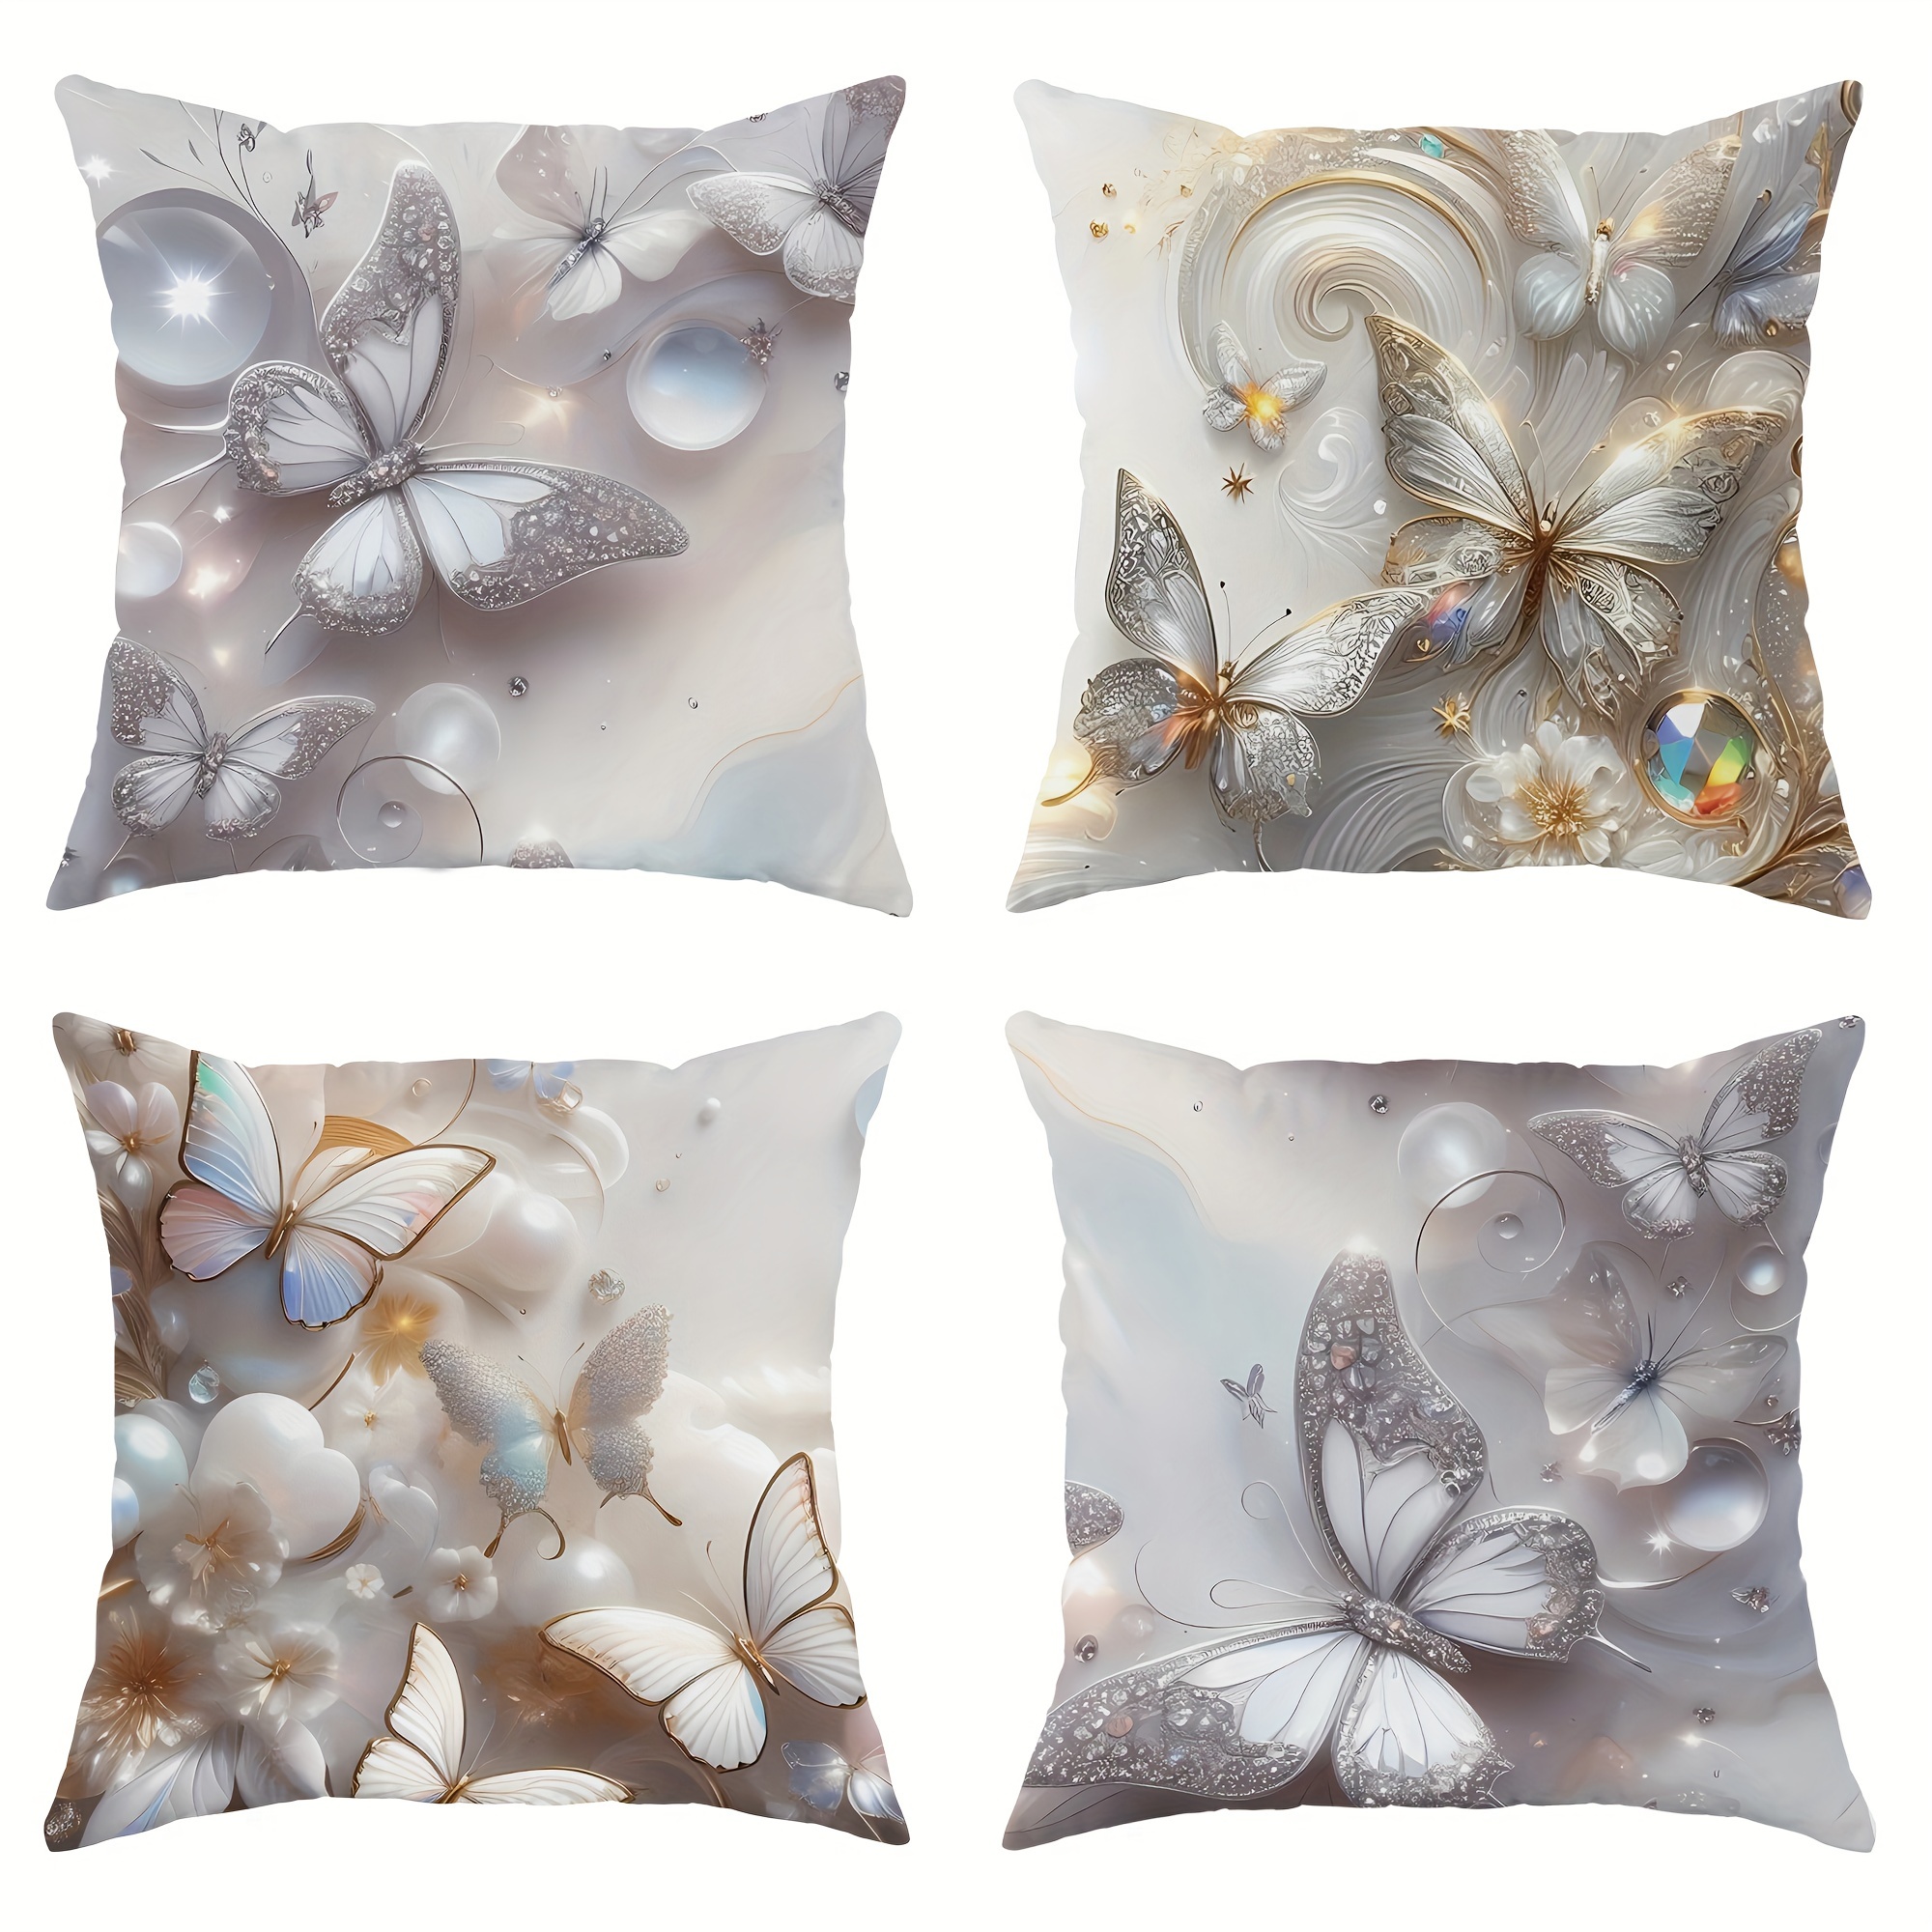 

4-piece Set Contemporary Butterfly & Blossom Velvet Throw Pillow Covers - Metallic Touches, 18x18 Inches - Ideal For Living Room & Bedroom Enhancement